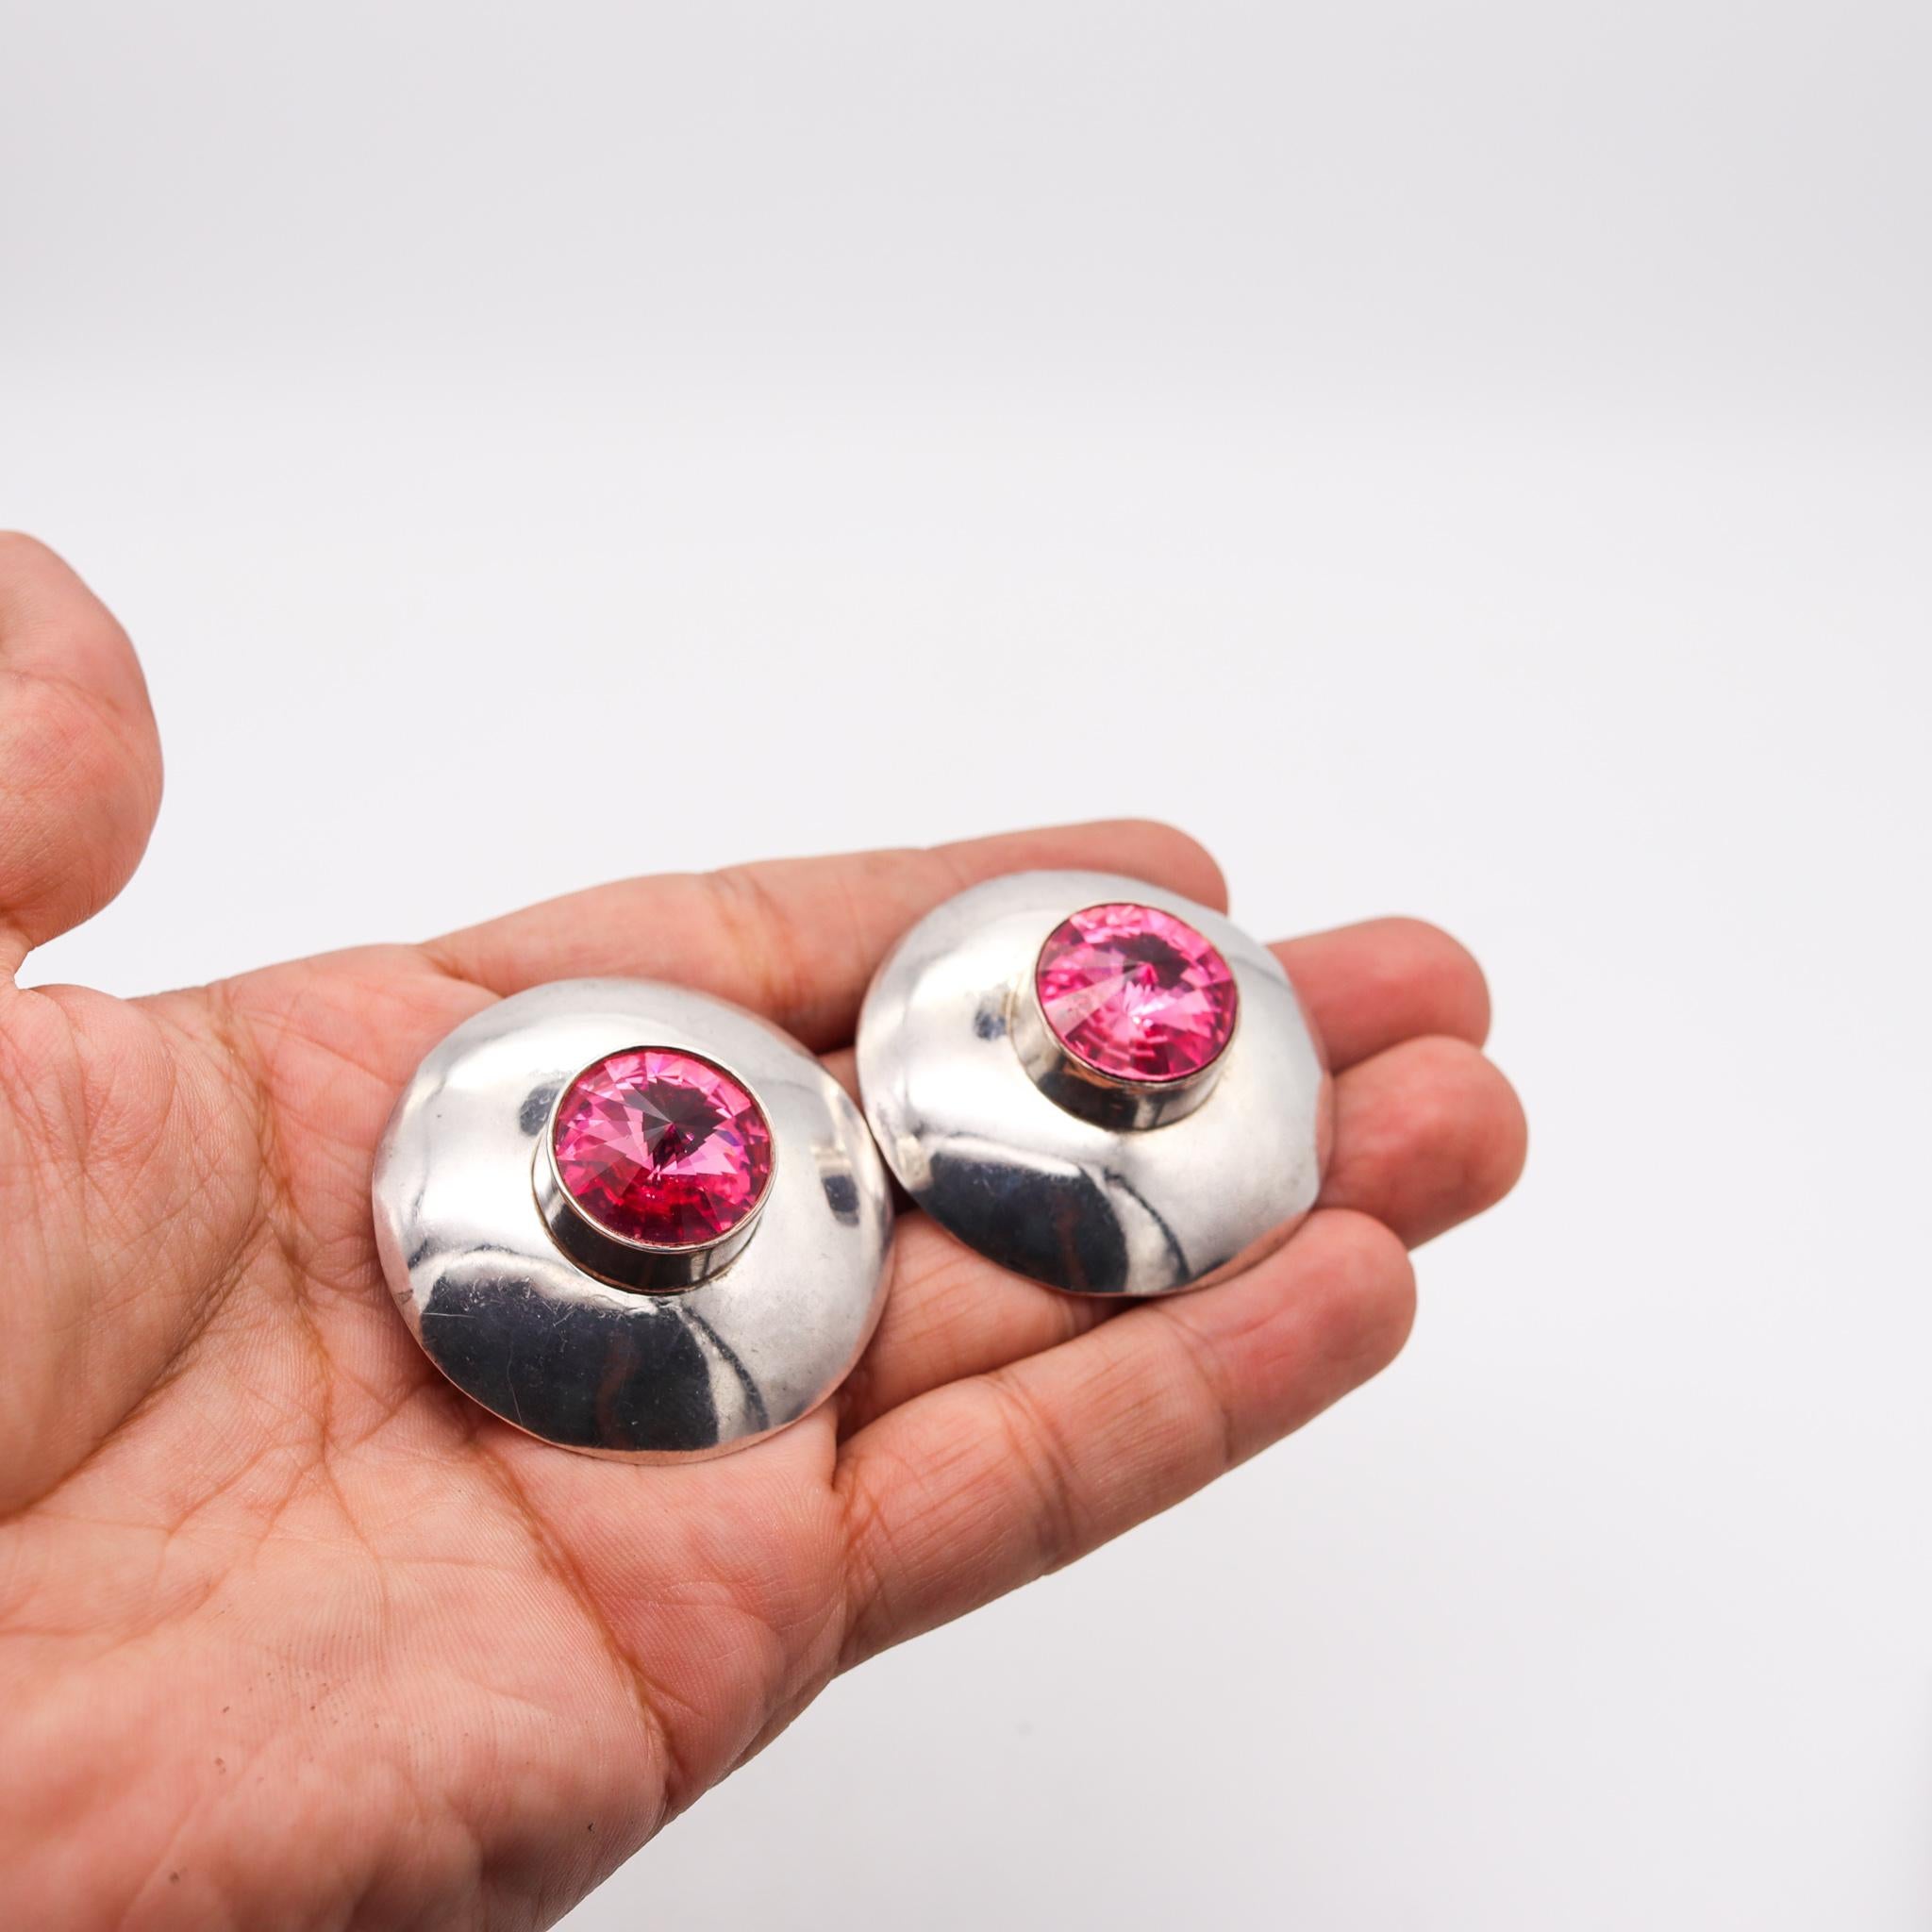 Women's Mexico 1970 Taxco Retro Modernist Earrings In Sterling Silver With Pink Faceted  For Sale